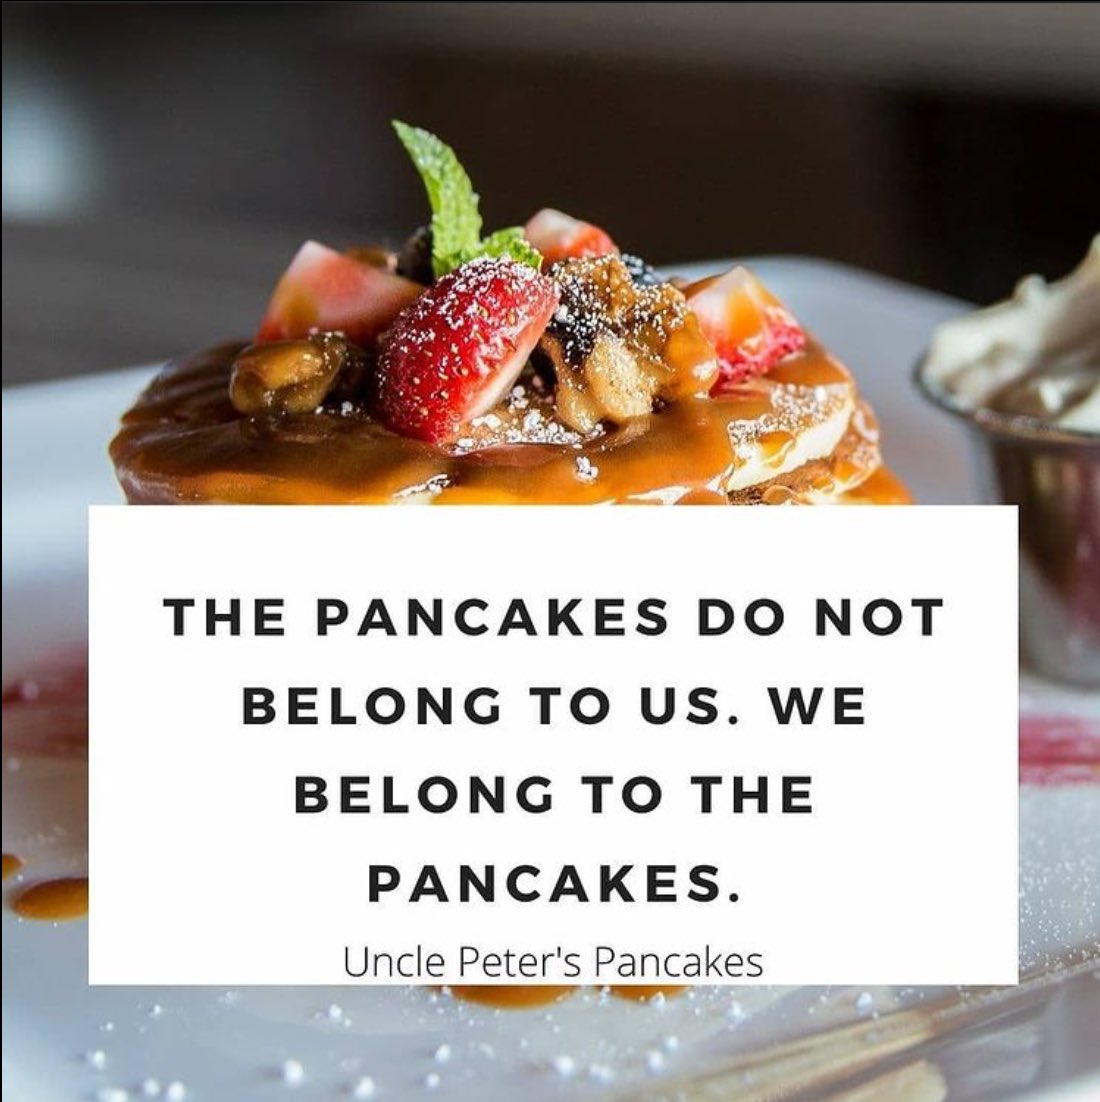 Quote of the day! Order now from Swiggy and Zomato or visit Uncle Peter's Pancakes and Cafe ! #unclepeterspancakes #pancakes #pancake #cafe #Mondayvibes #indiacafe #bangalorecafes #bengaluru #kolkata #desserts #bengaluru #quote #bangalore #bangaloreblogger